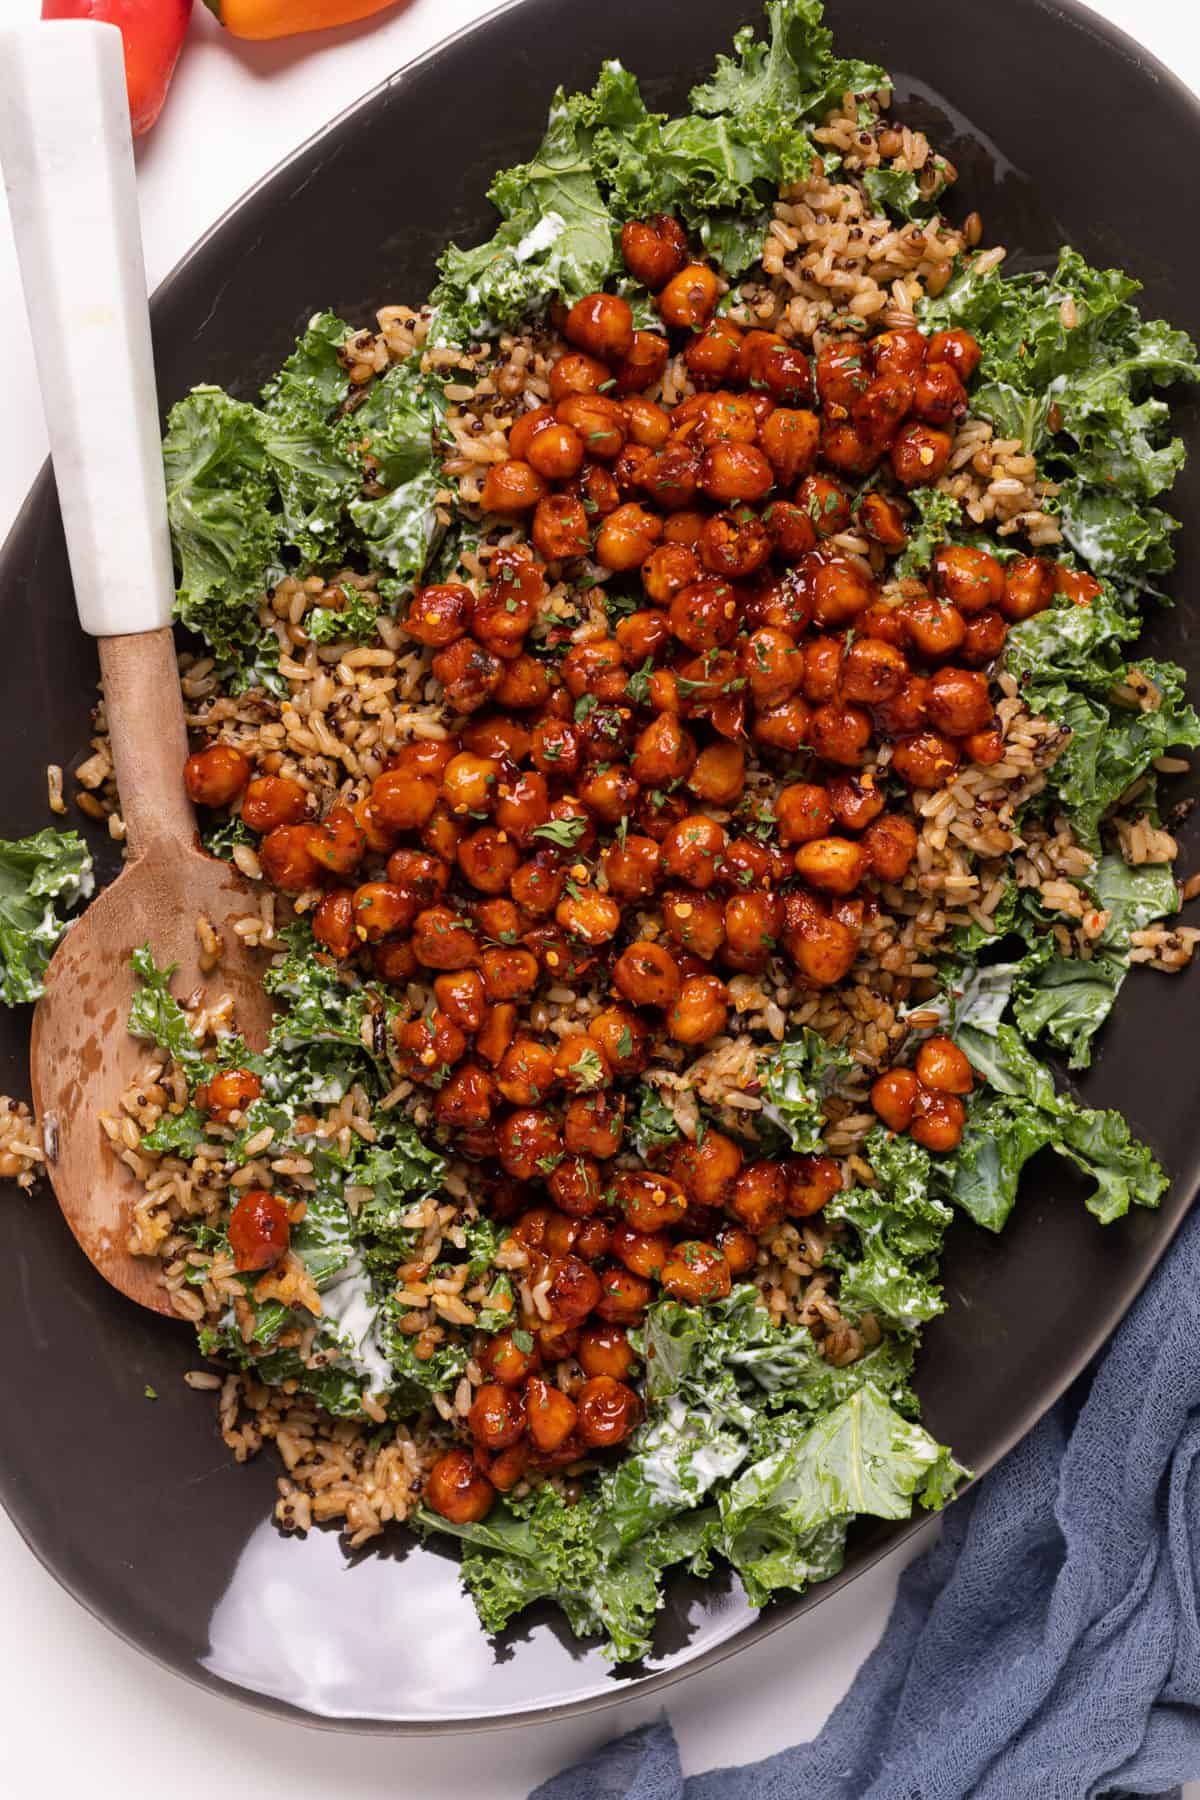 Healthy Loaded Kale Salad with Spicy Chickpeas